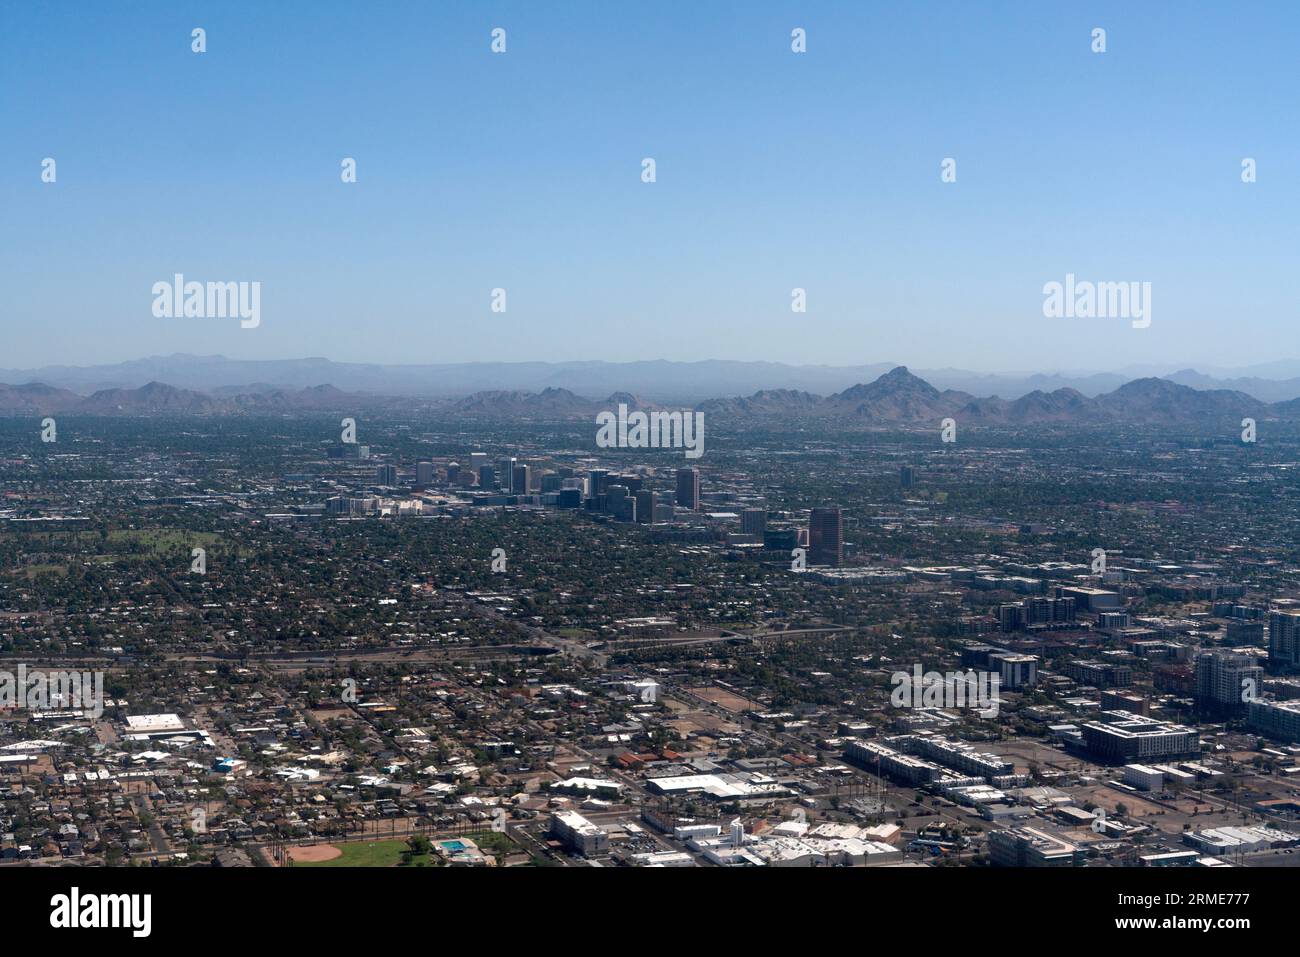 Downtown Phoenix, AZ viewed from high altitude distance Stock Photo